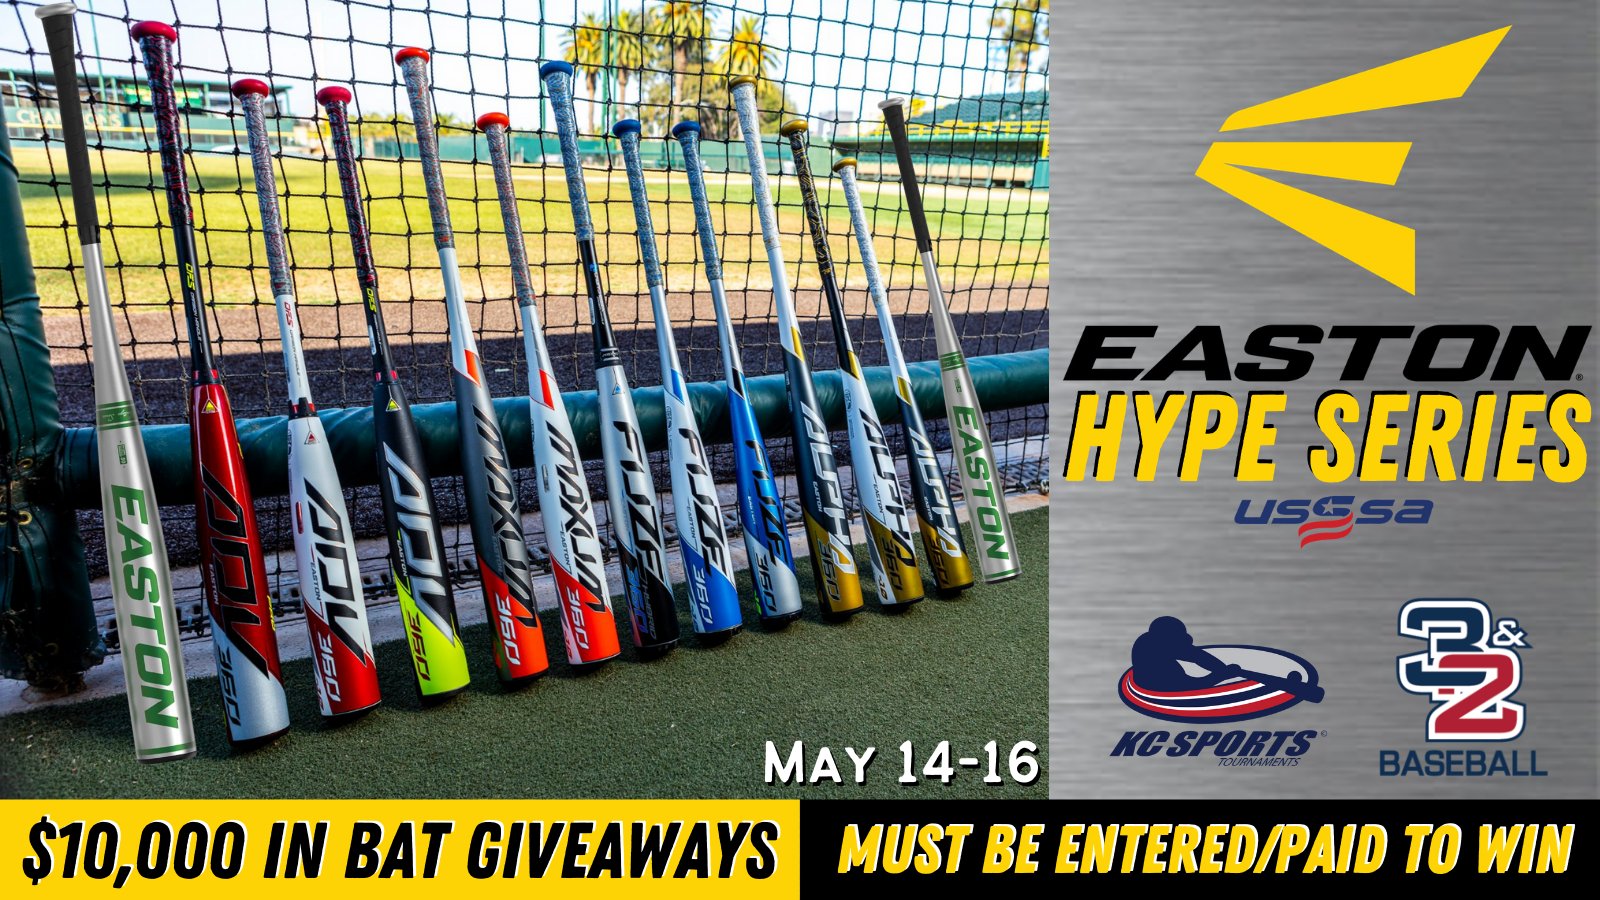 KC Sports on X: @KCSPORTS & @jc3and2baseball is proud to bring you the  @EastonBaseball Hype Series! We will be giving away $10,000 worth of bats  leading up to & throughout the event!